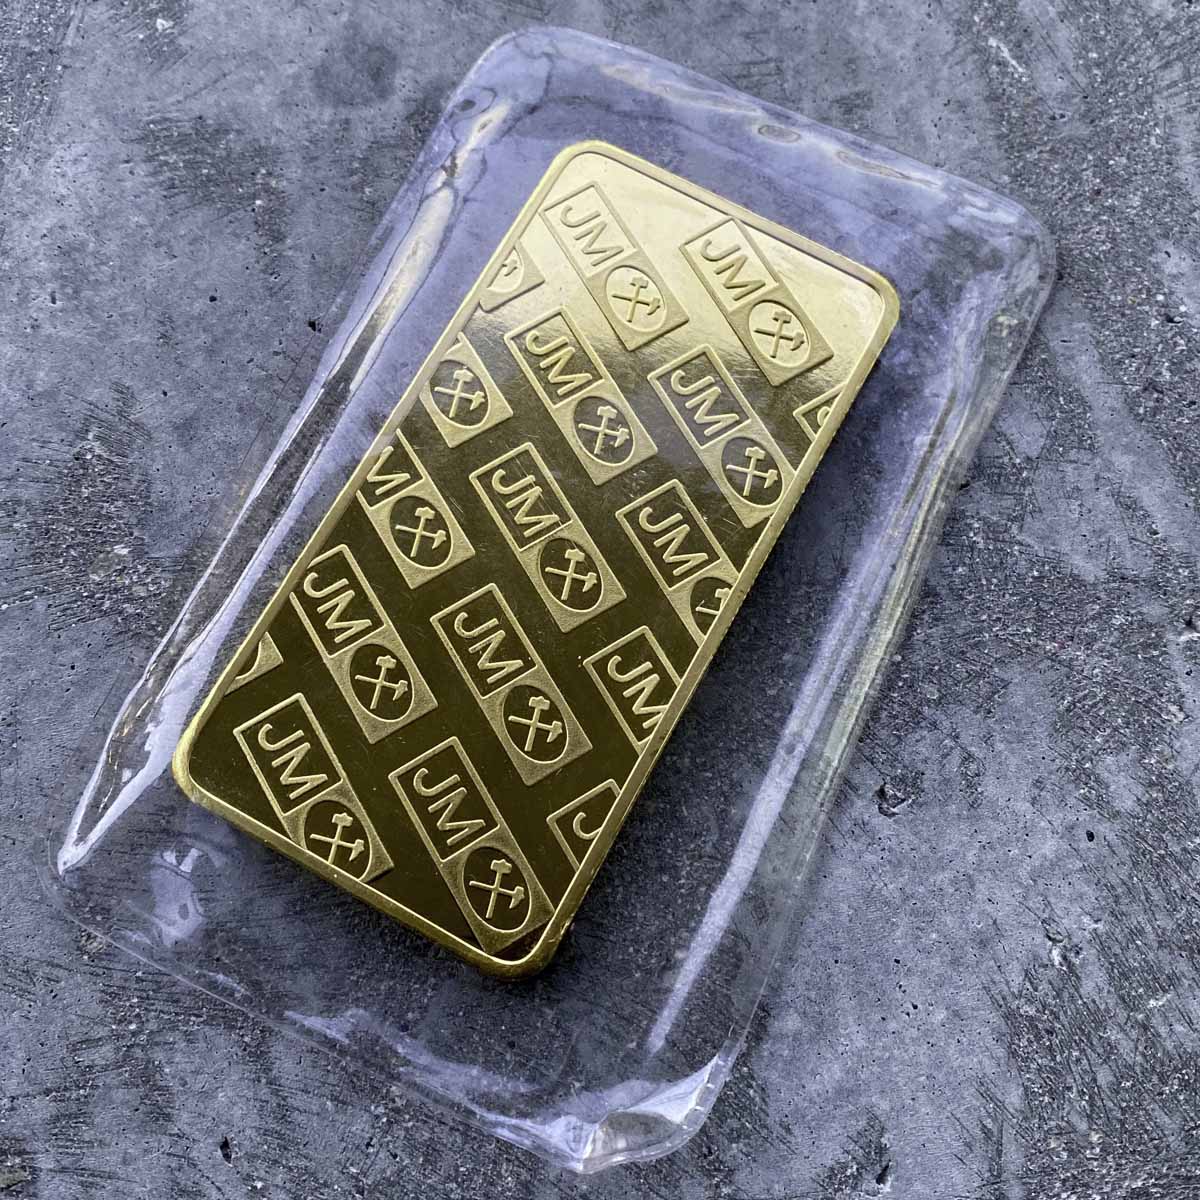 Johnson Matthey Perfectly Sealed 10oz .999 Pure Gold Bar - CoinWatchCo